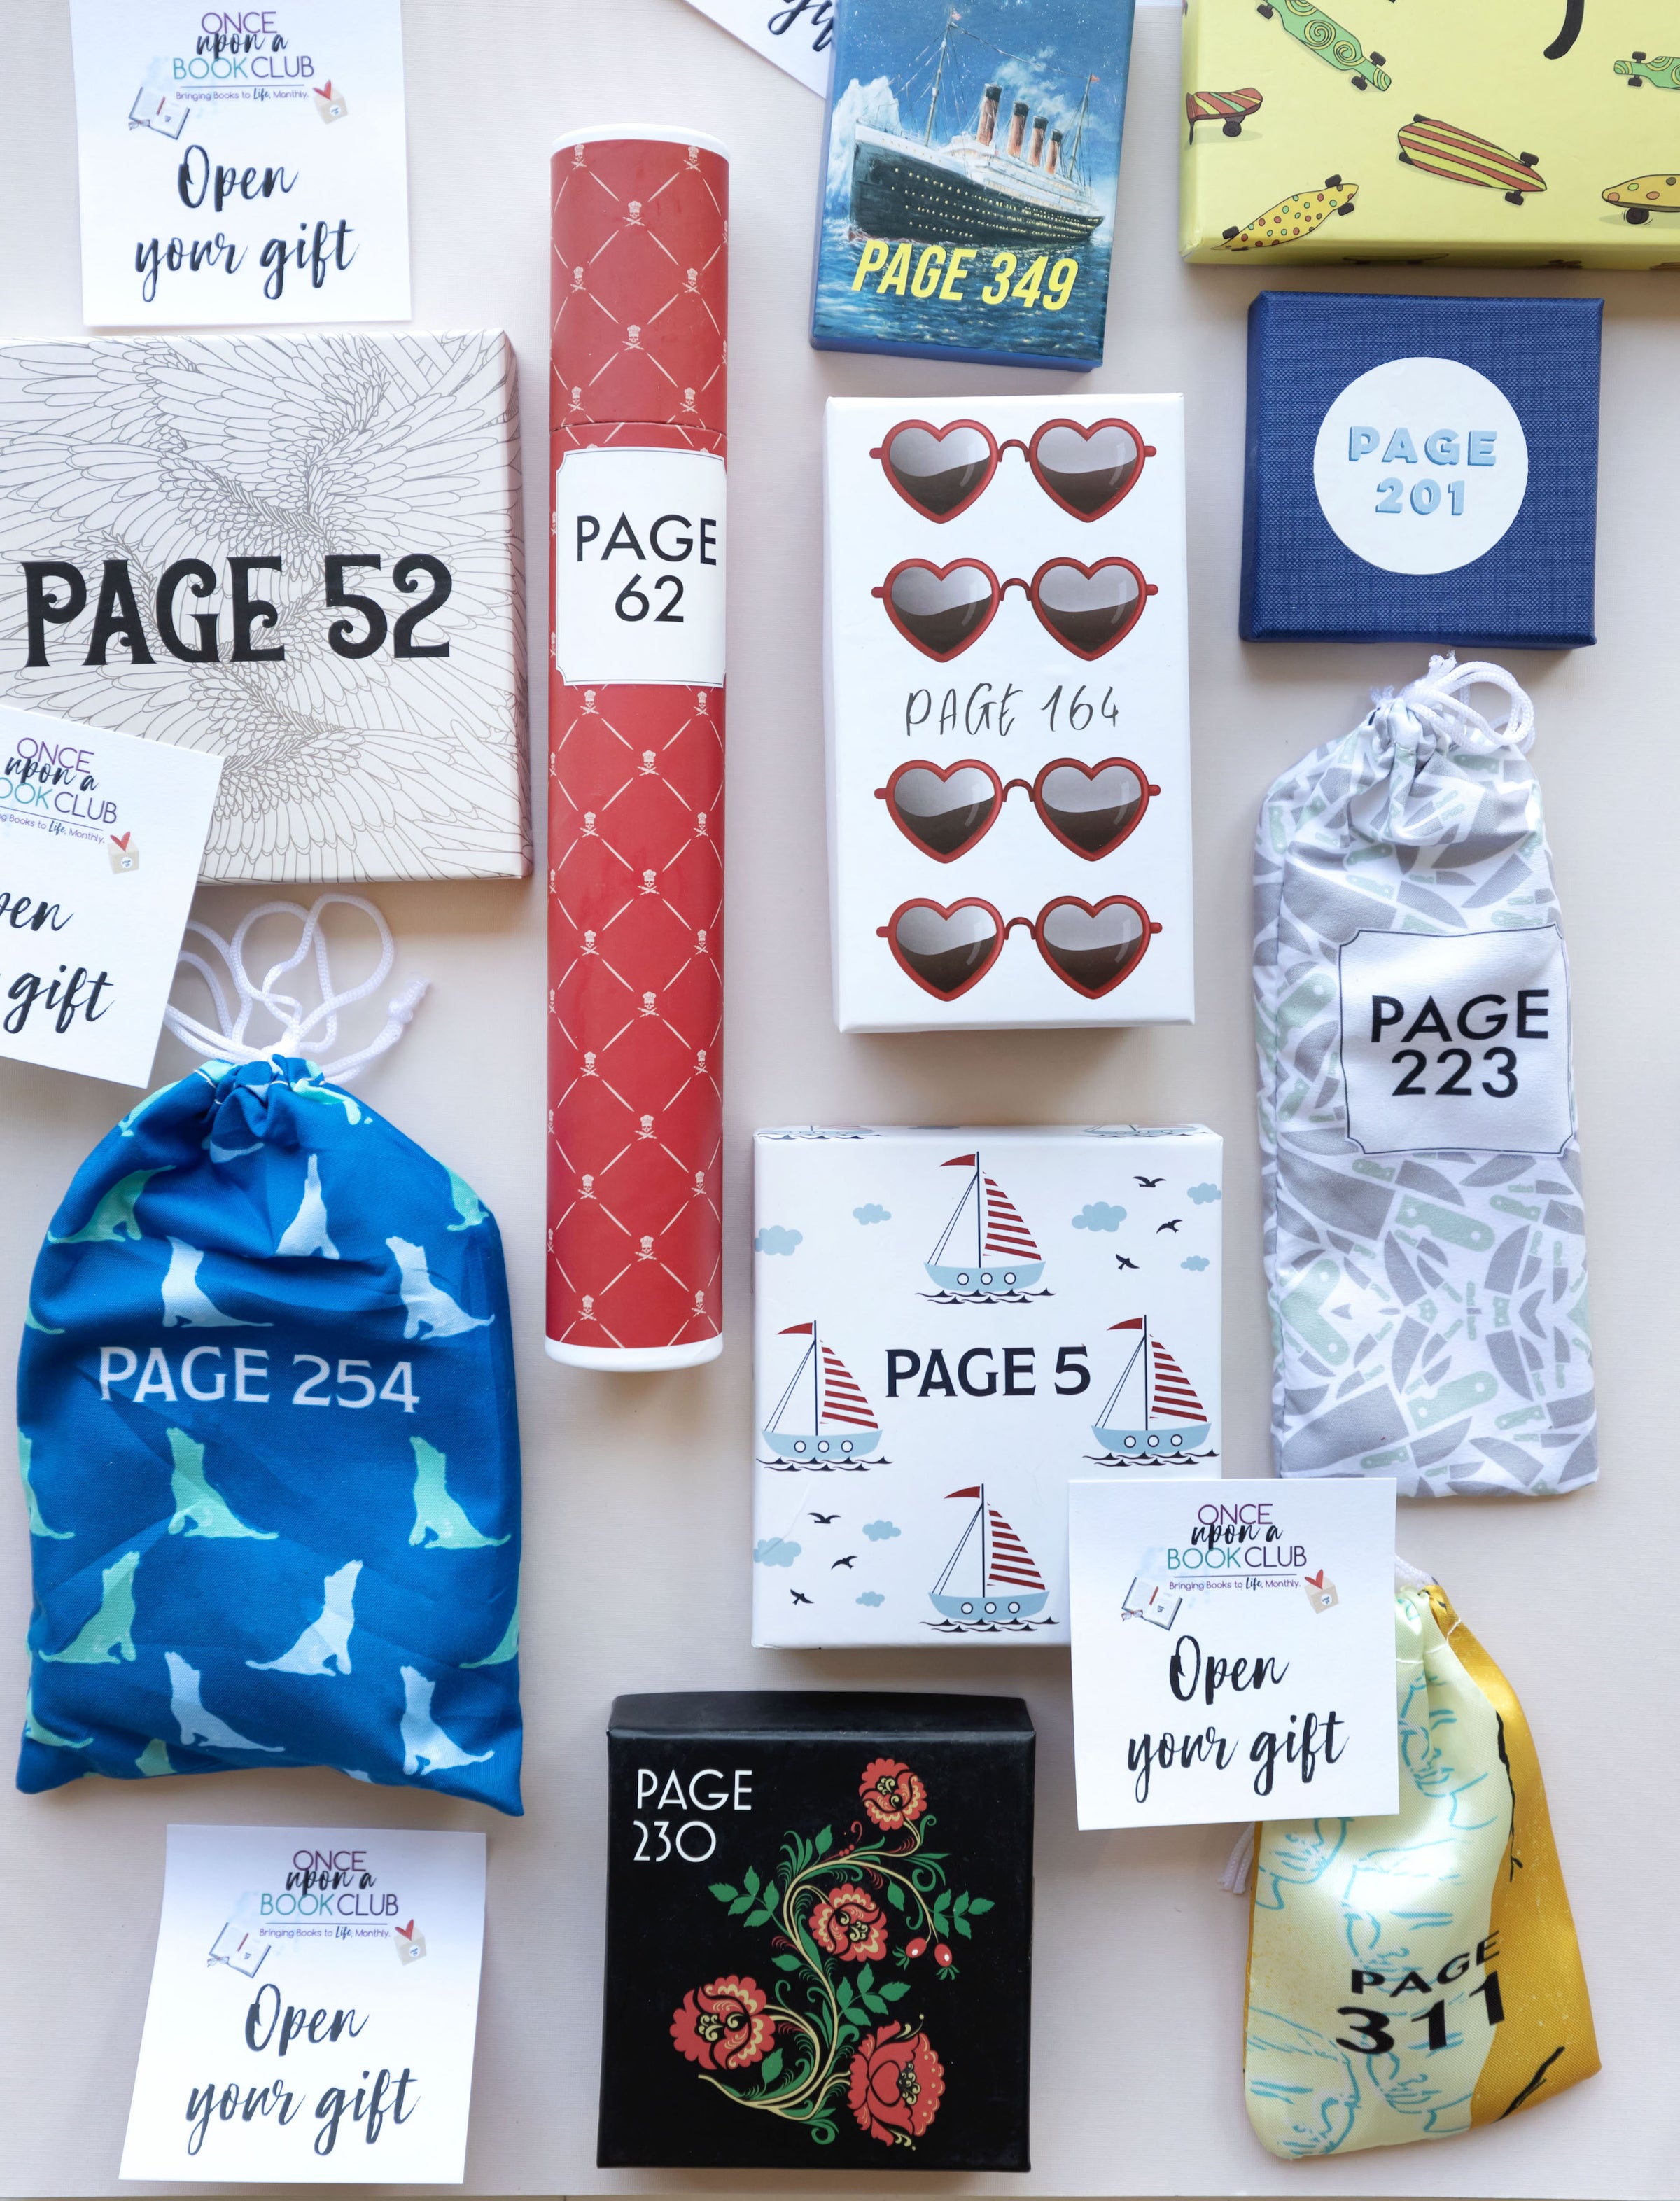 A collection of wrapped gifts labeled with page numbers lay flat on a surface. Gift packaging varies from boxes, to bags, to tubes. Colors vary but all gifts are labeled with a page number. There are also some Open Your Gift stickers around the image.